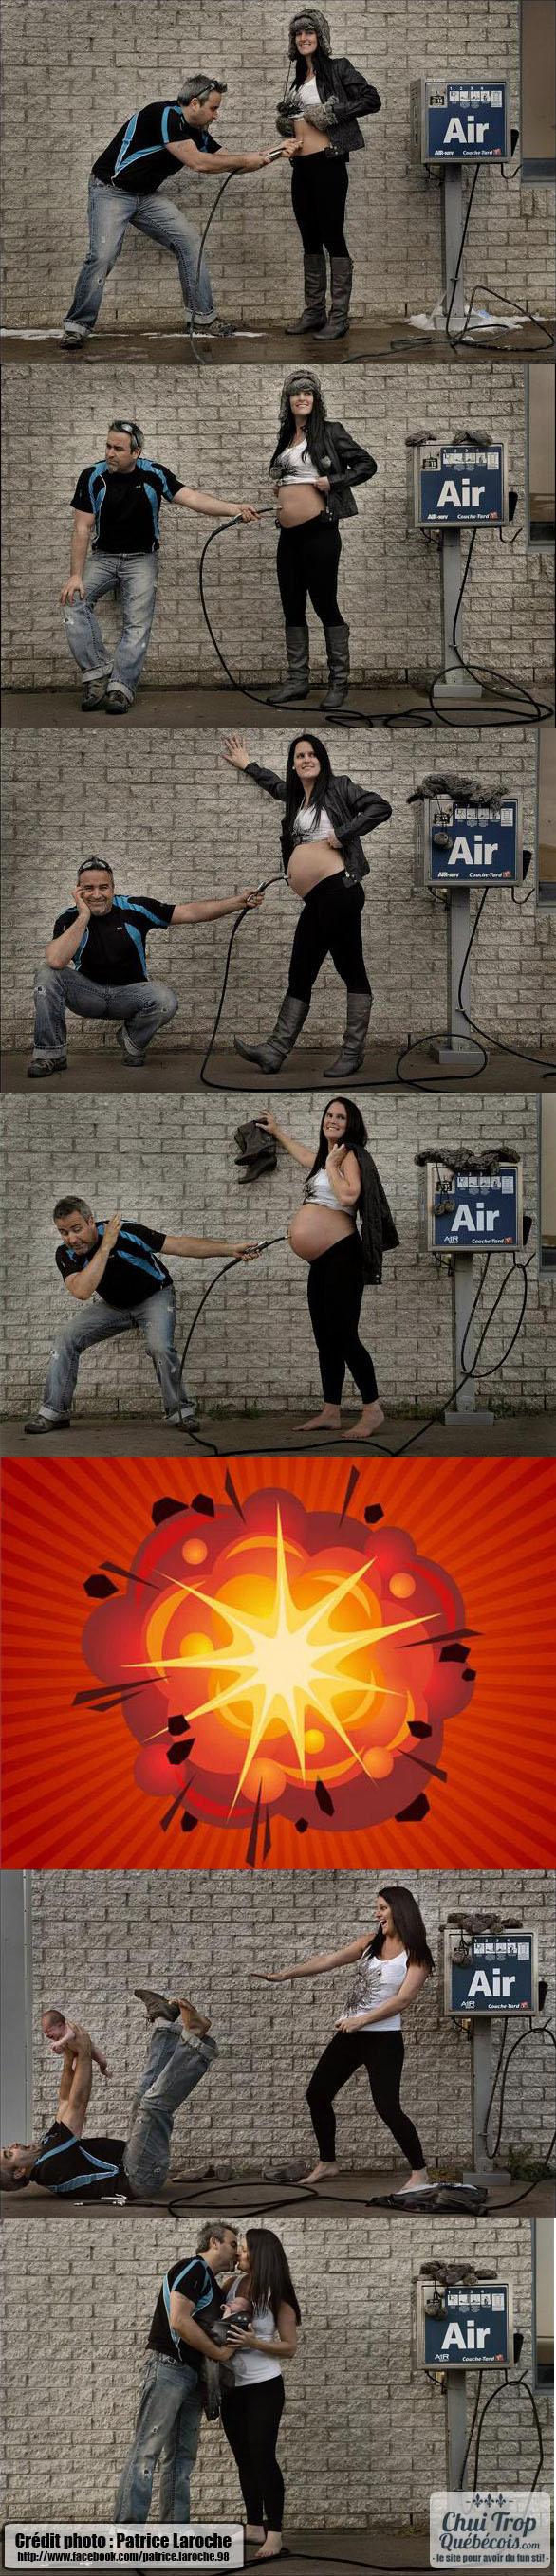 Extremely Clever Pregnancy Photo Series